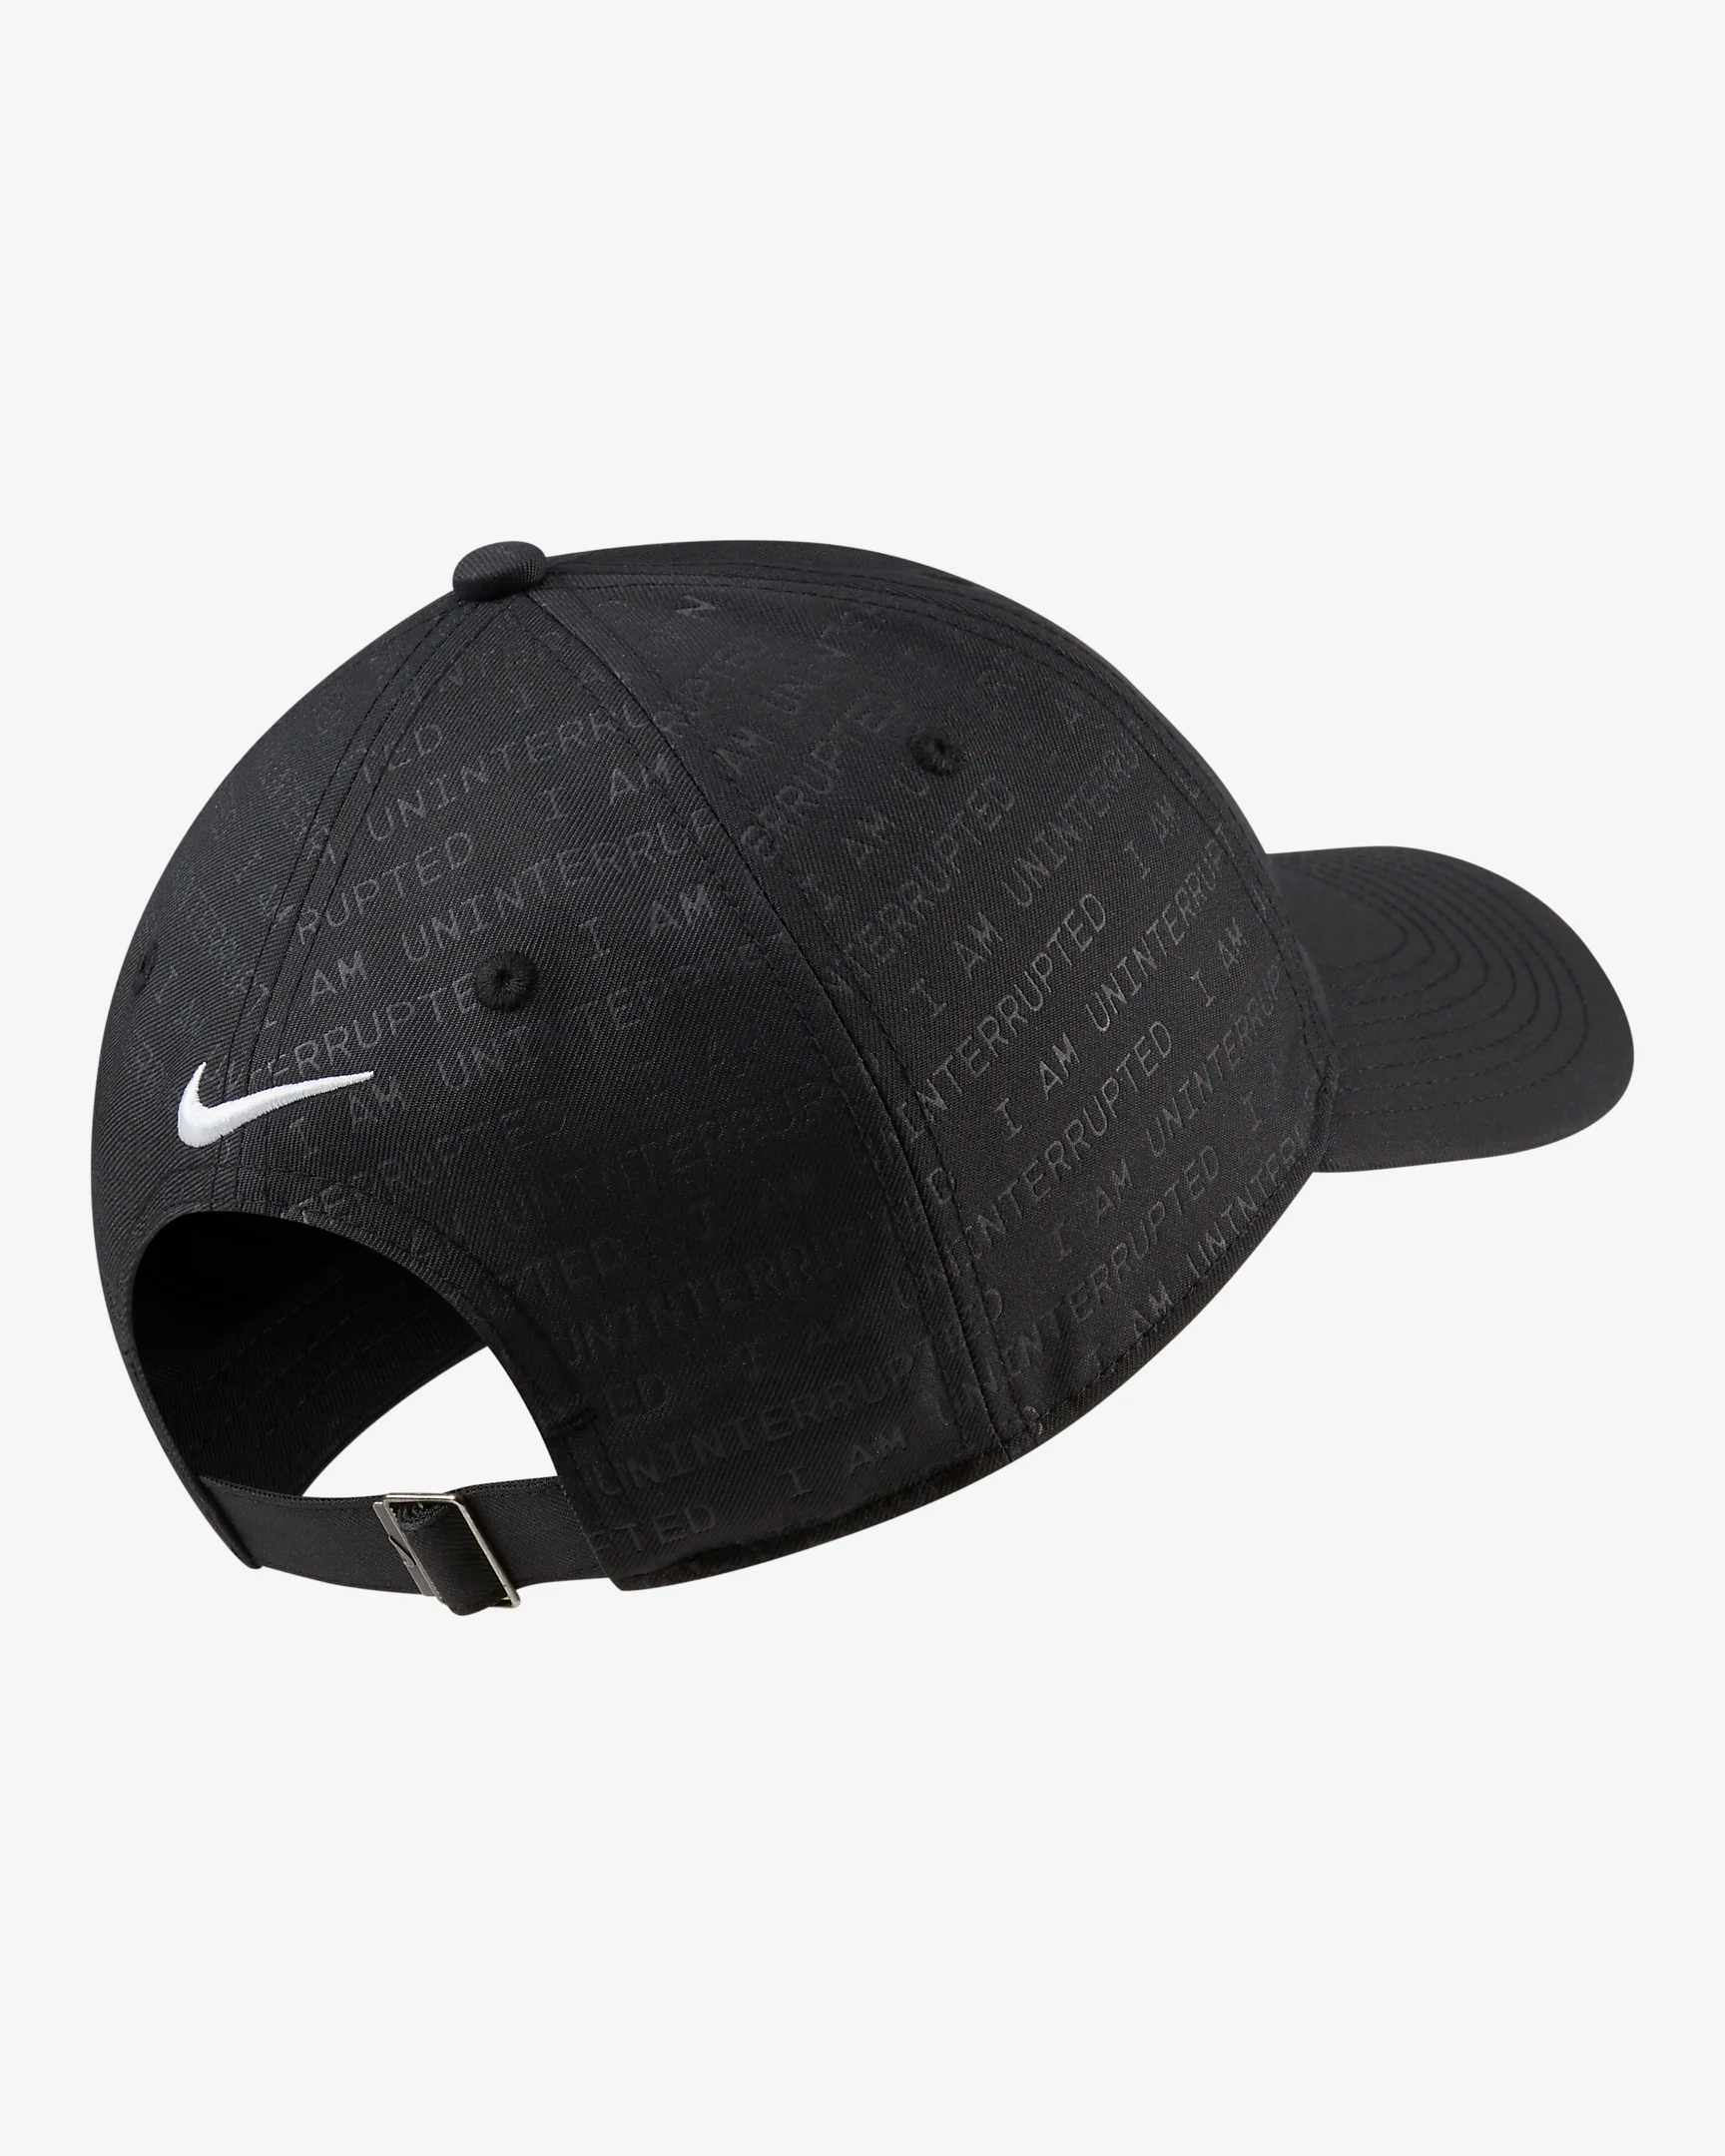 heritage86-more-than-an-athlete-adjustable-hat-7hcnz8 (1).png